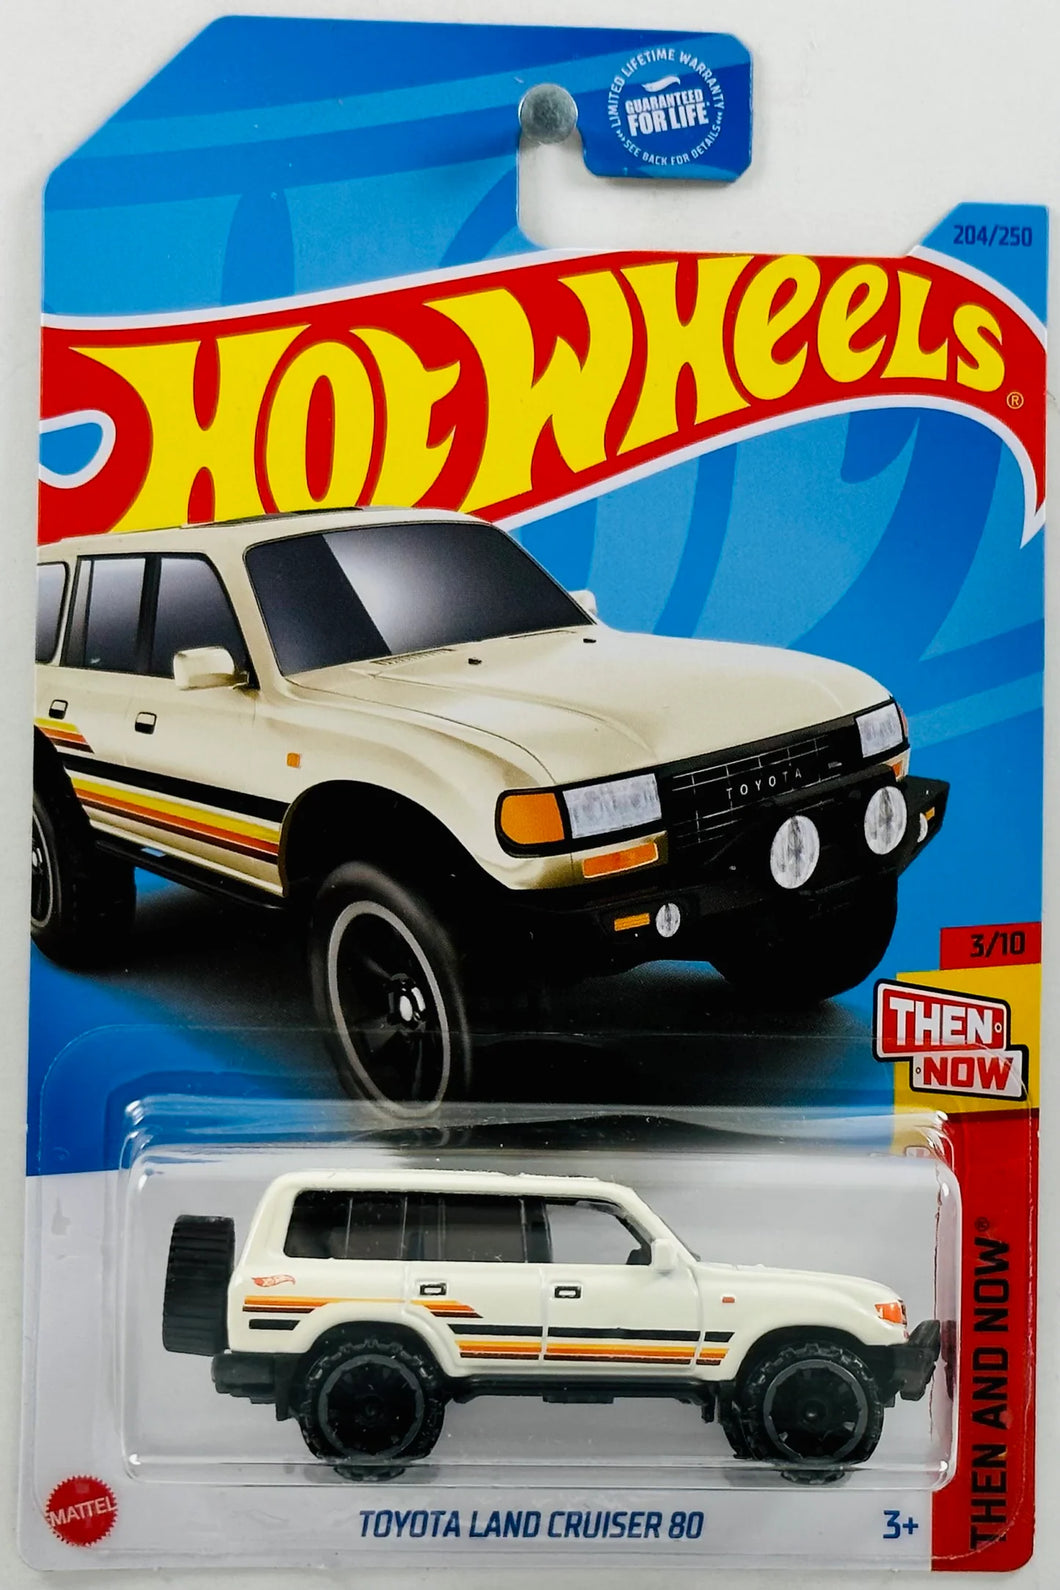 2023 Hot Wheels Toyota Land Cruiser 80 Then and Now 3/10, 204/250